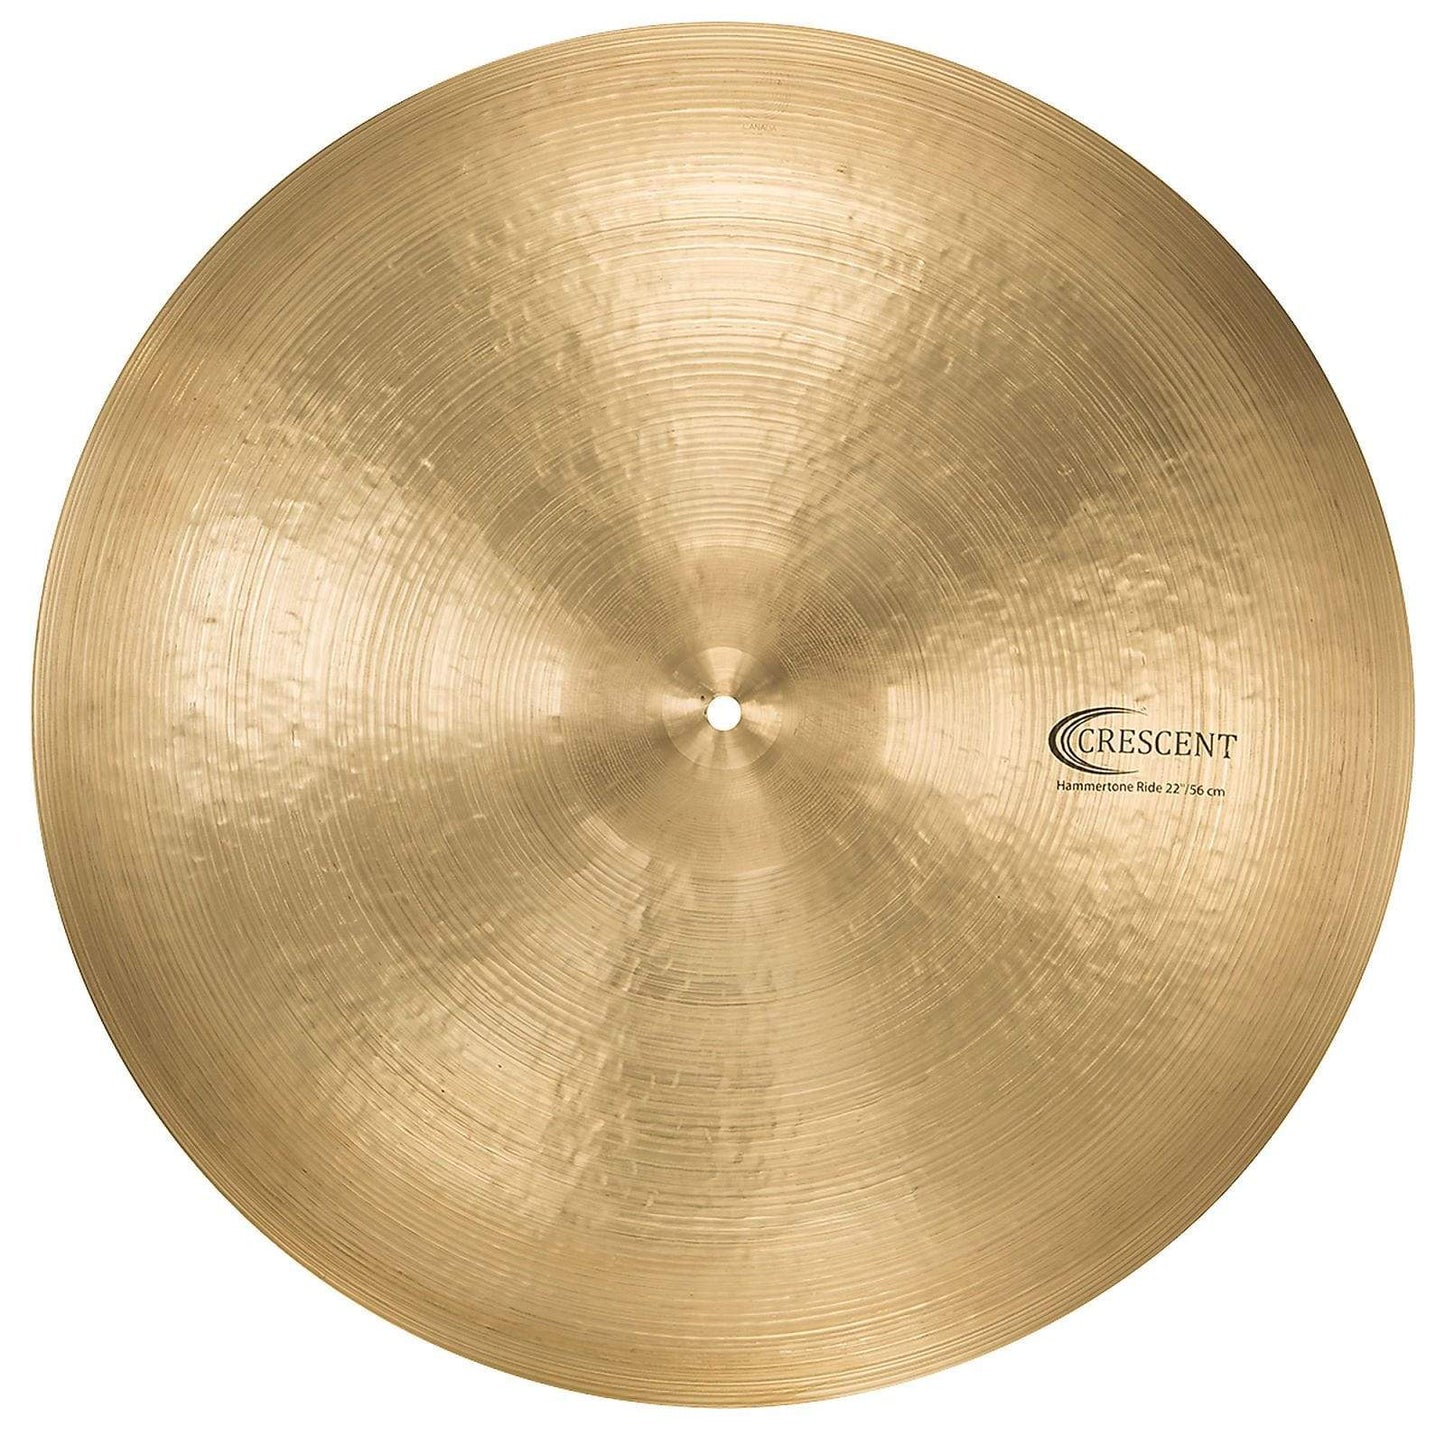 Crescent 22" Hammertone Ride Cymbal Drums and Percussion / Cymbals / Ride